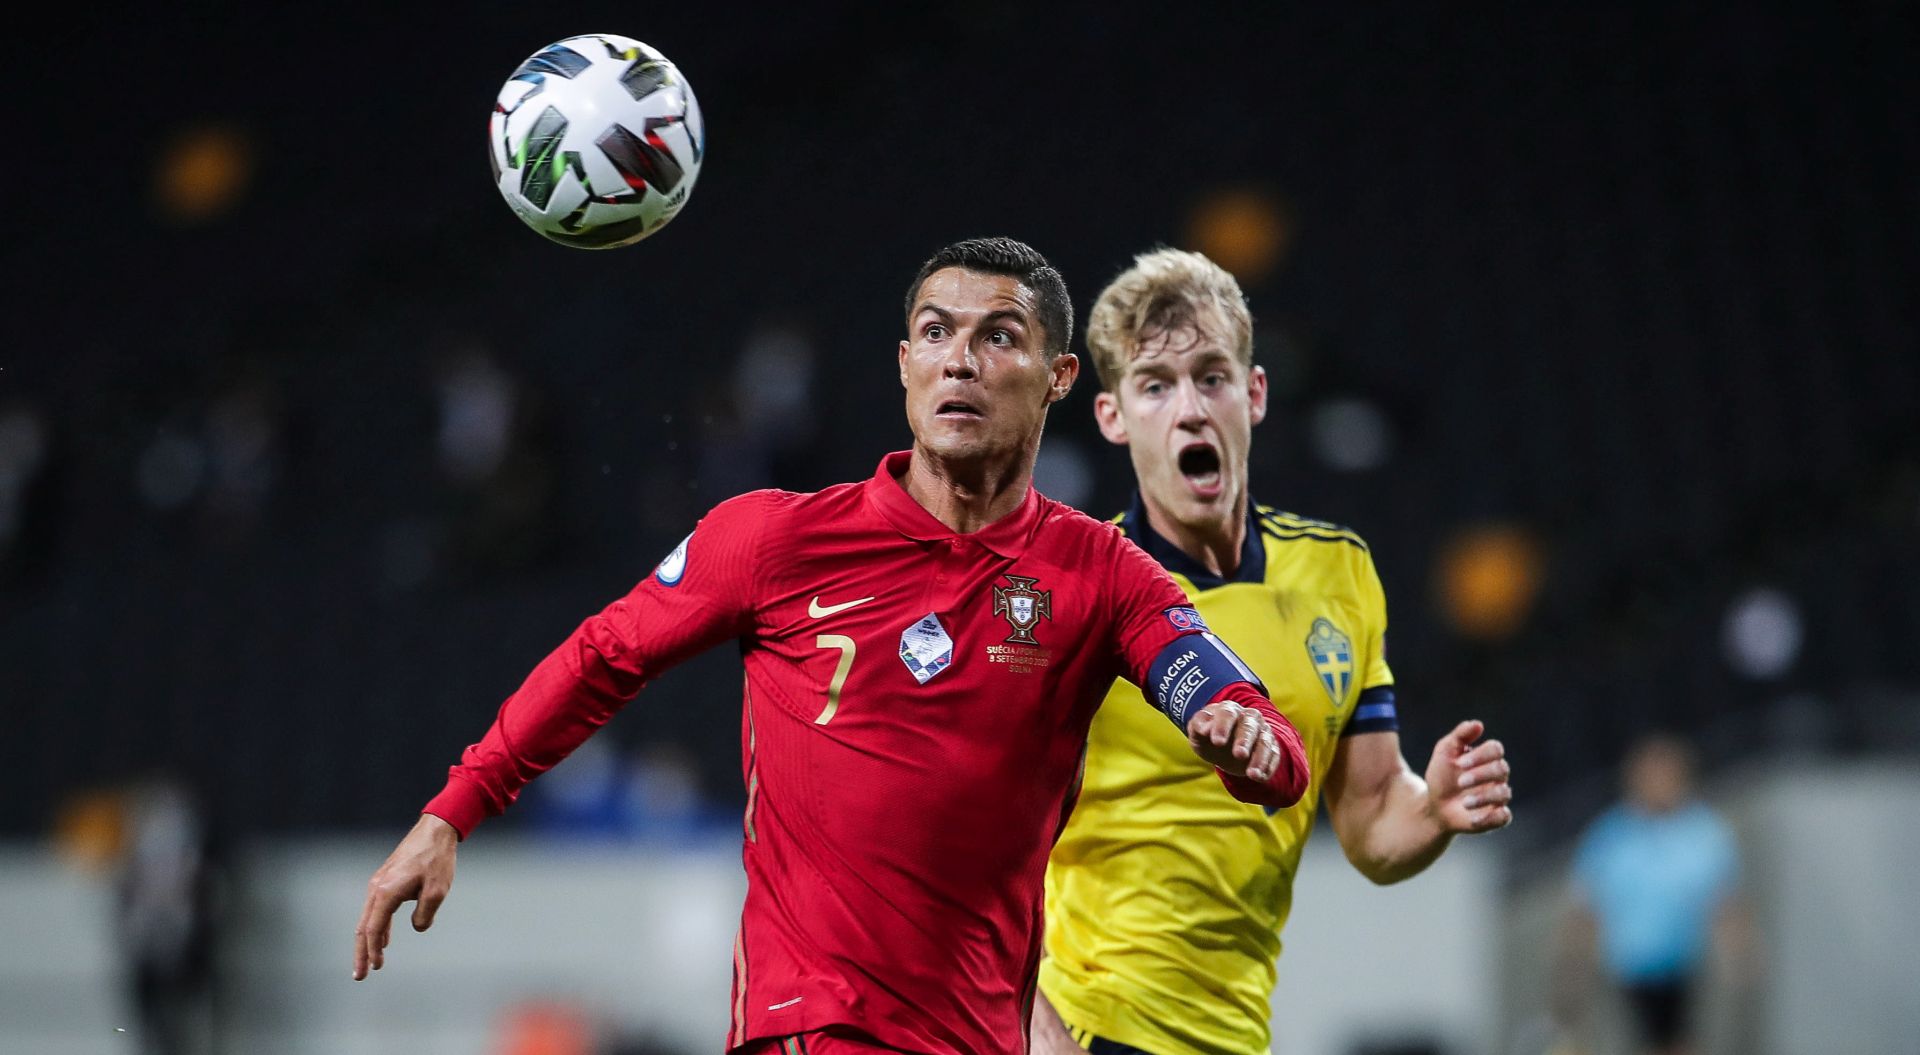 epa08655186 Sweden's Filip Helander (R) in action against Portugal's Cristiano Ronaldo during the UEFA Nations League match at Friends Arena, in Stockholm, Sweden, 08 September 2020.  EPA/MARIO CRUZ